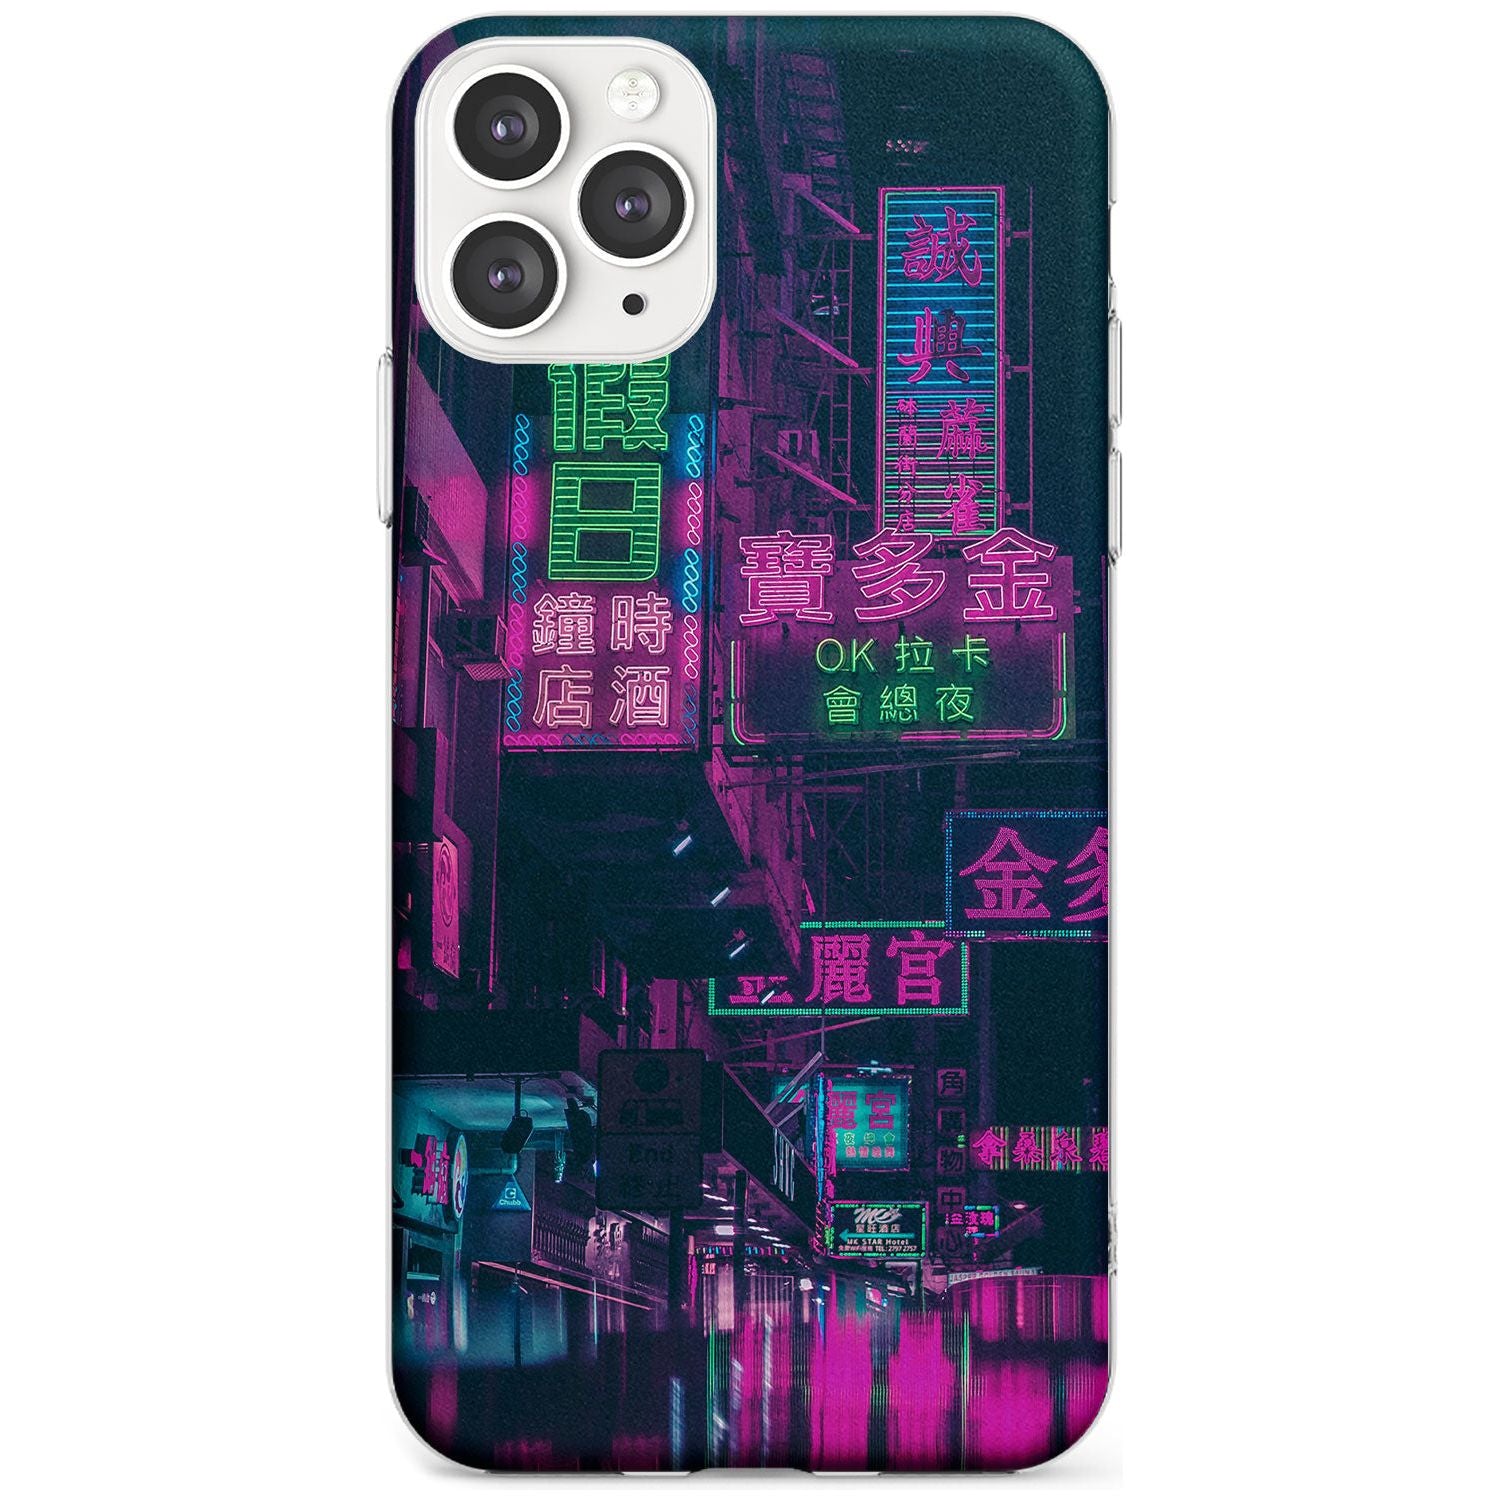 Rainy Reflections - Neon Cities Photographs Slim TPU Phone Case for iPhone 11 Pro Max